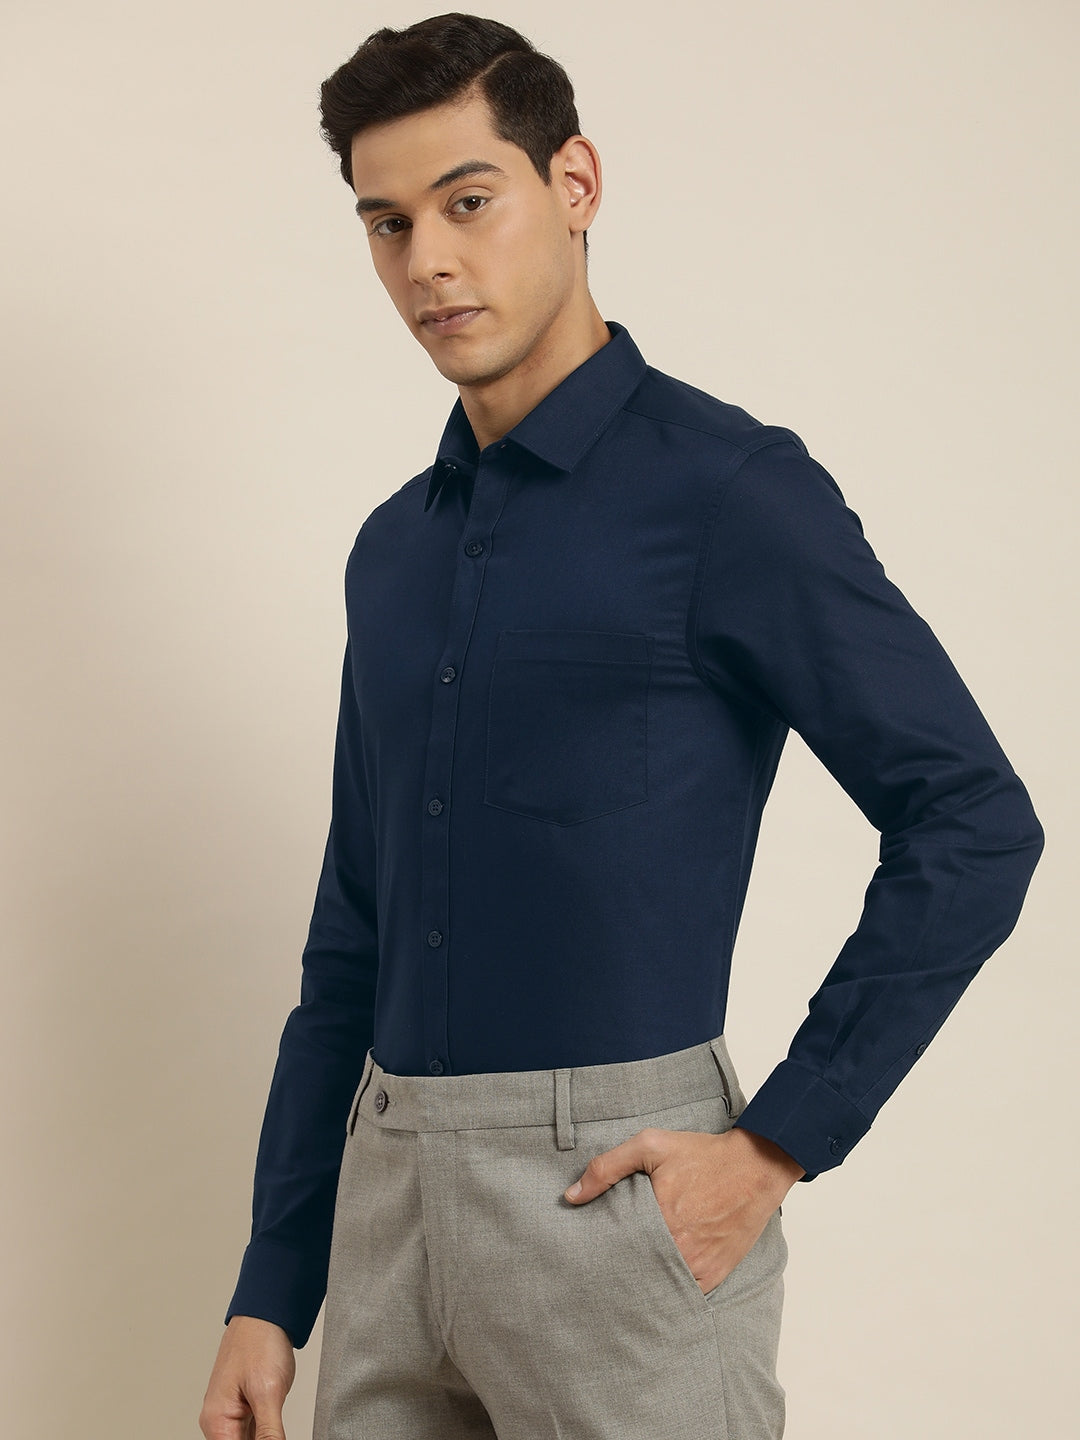 fashionly Slim Fit Men Grey, Blue Trousers - Buy fashionly Slim Fit Men  Grey, Blue Trousers Online at Best Prices in India | Flipkart.com